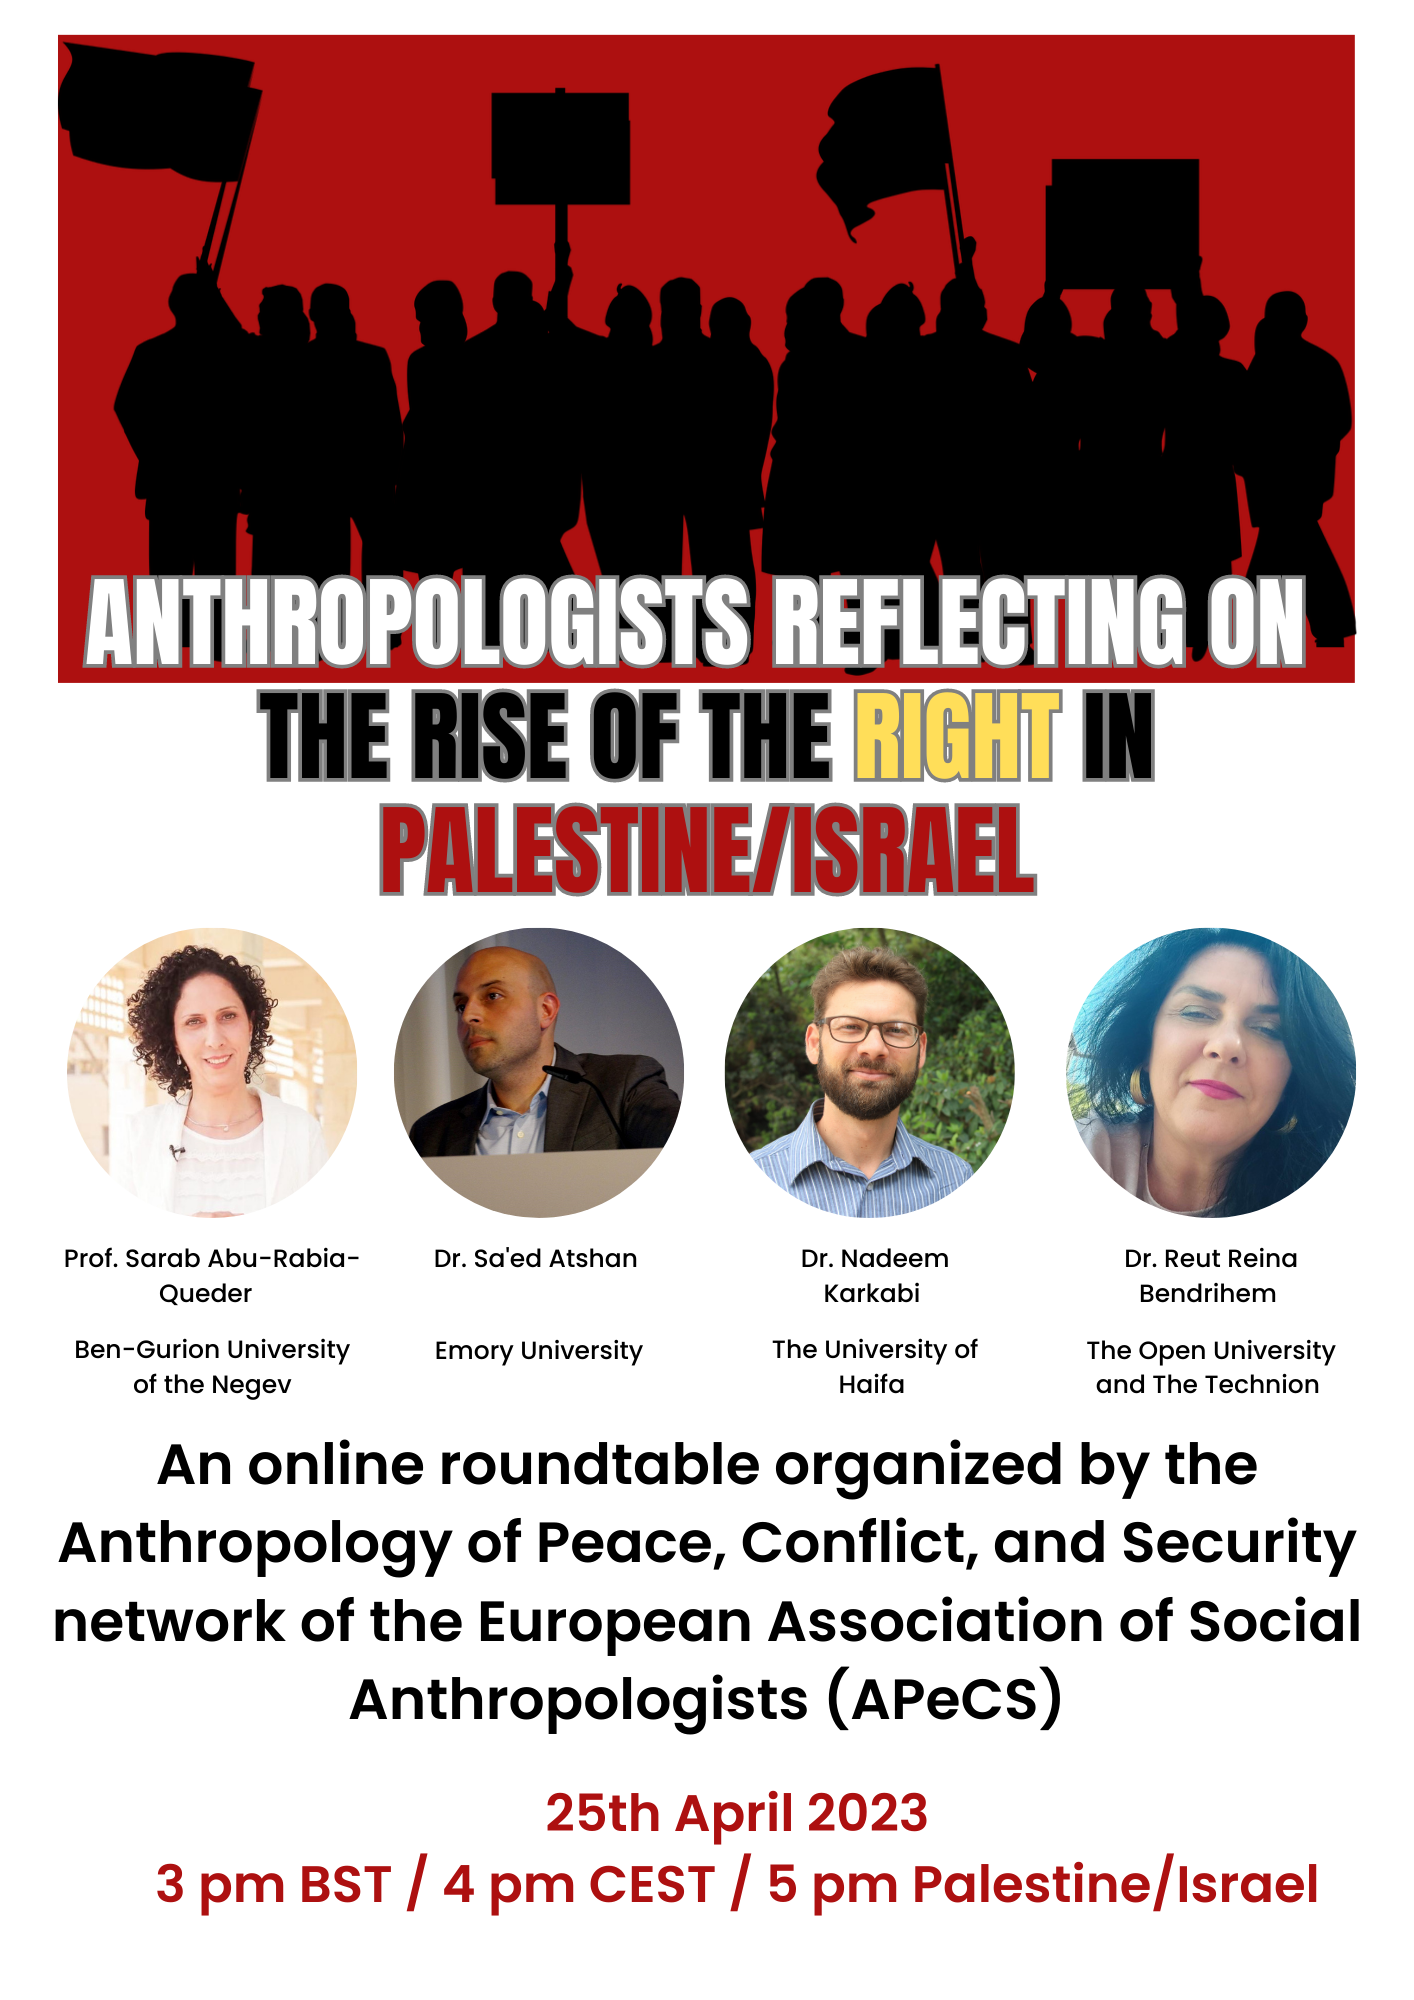 Anthropologists reflecting on the rise of the right in Palestine/Israel